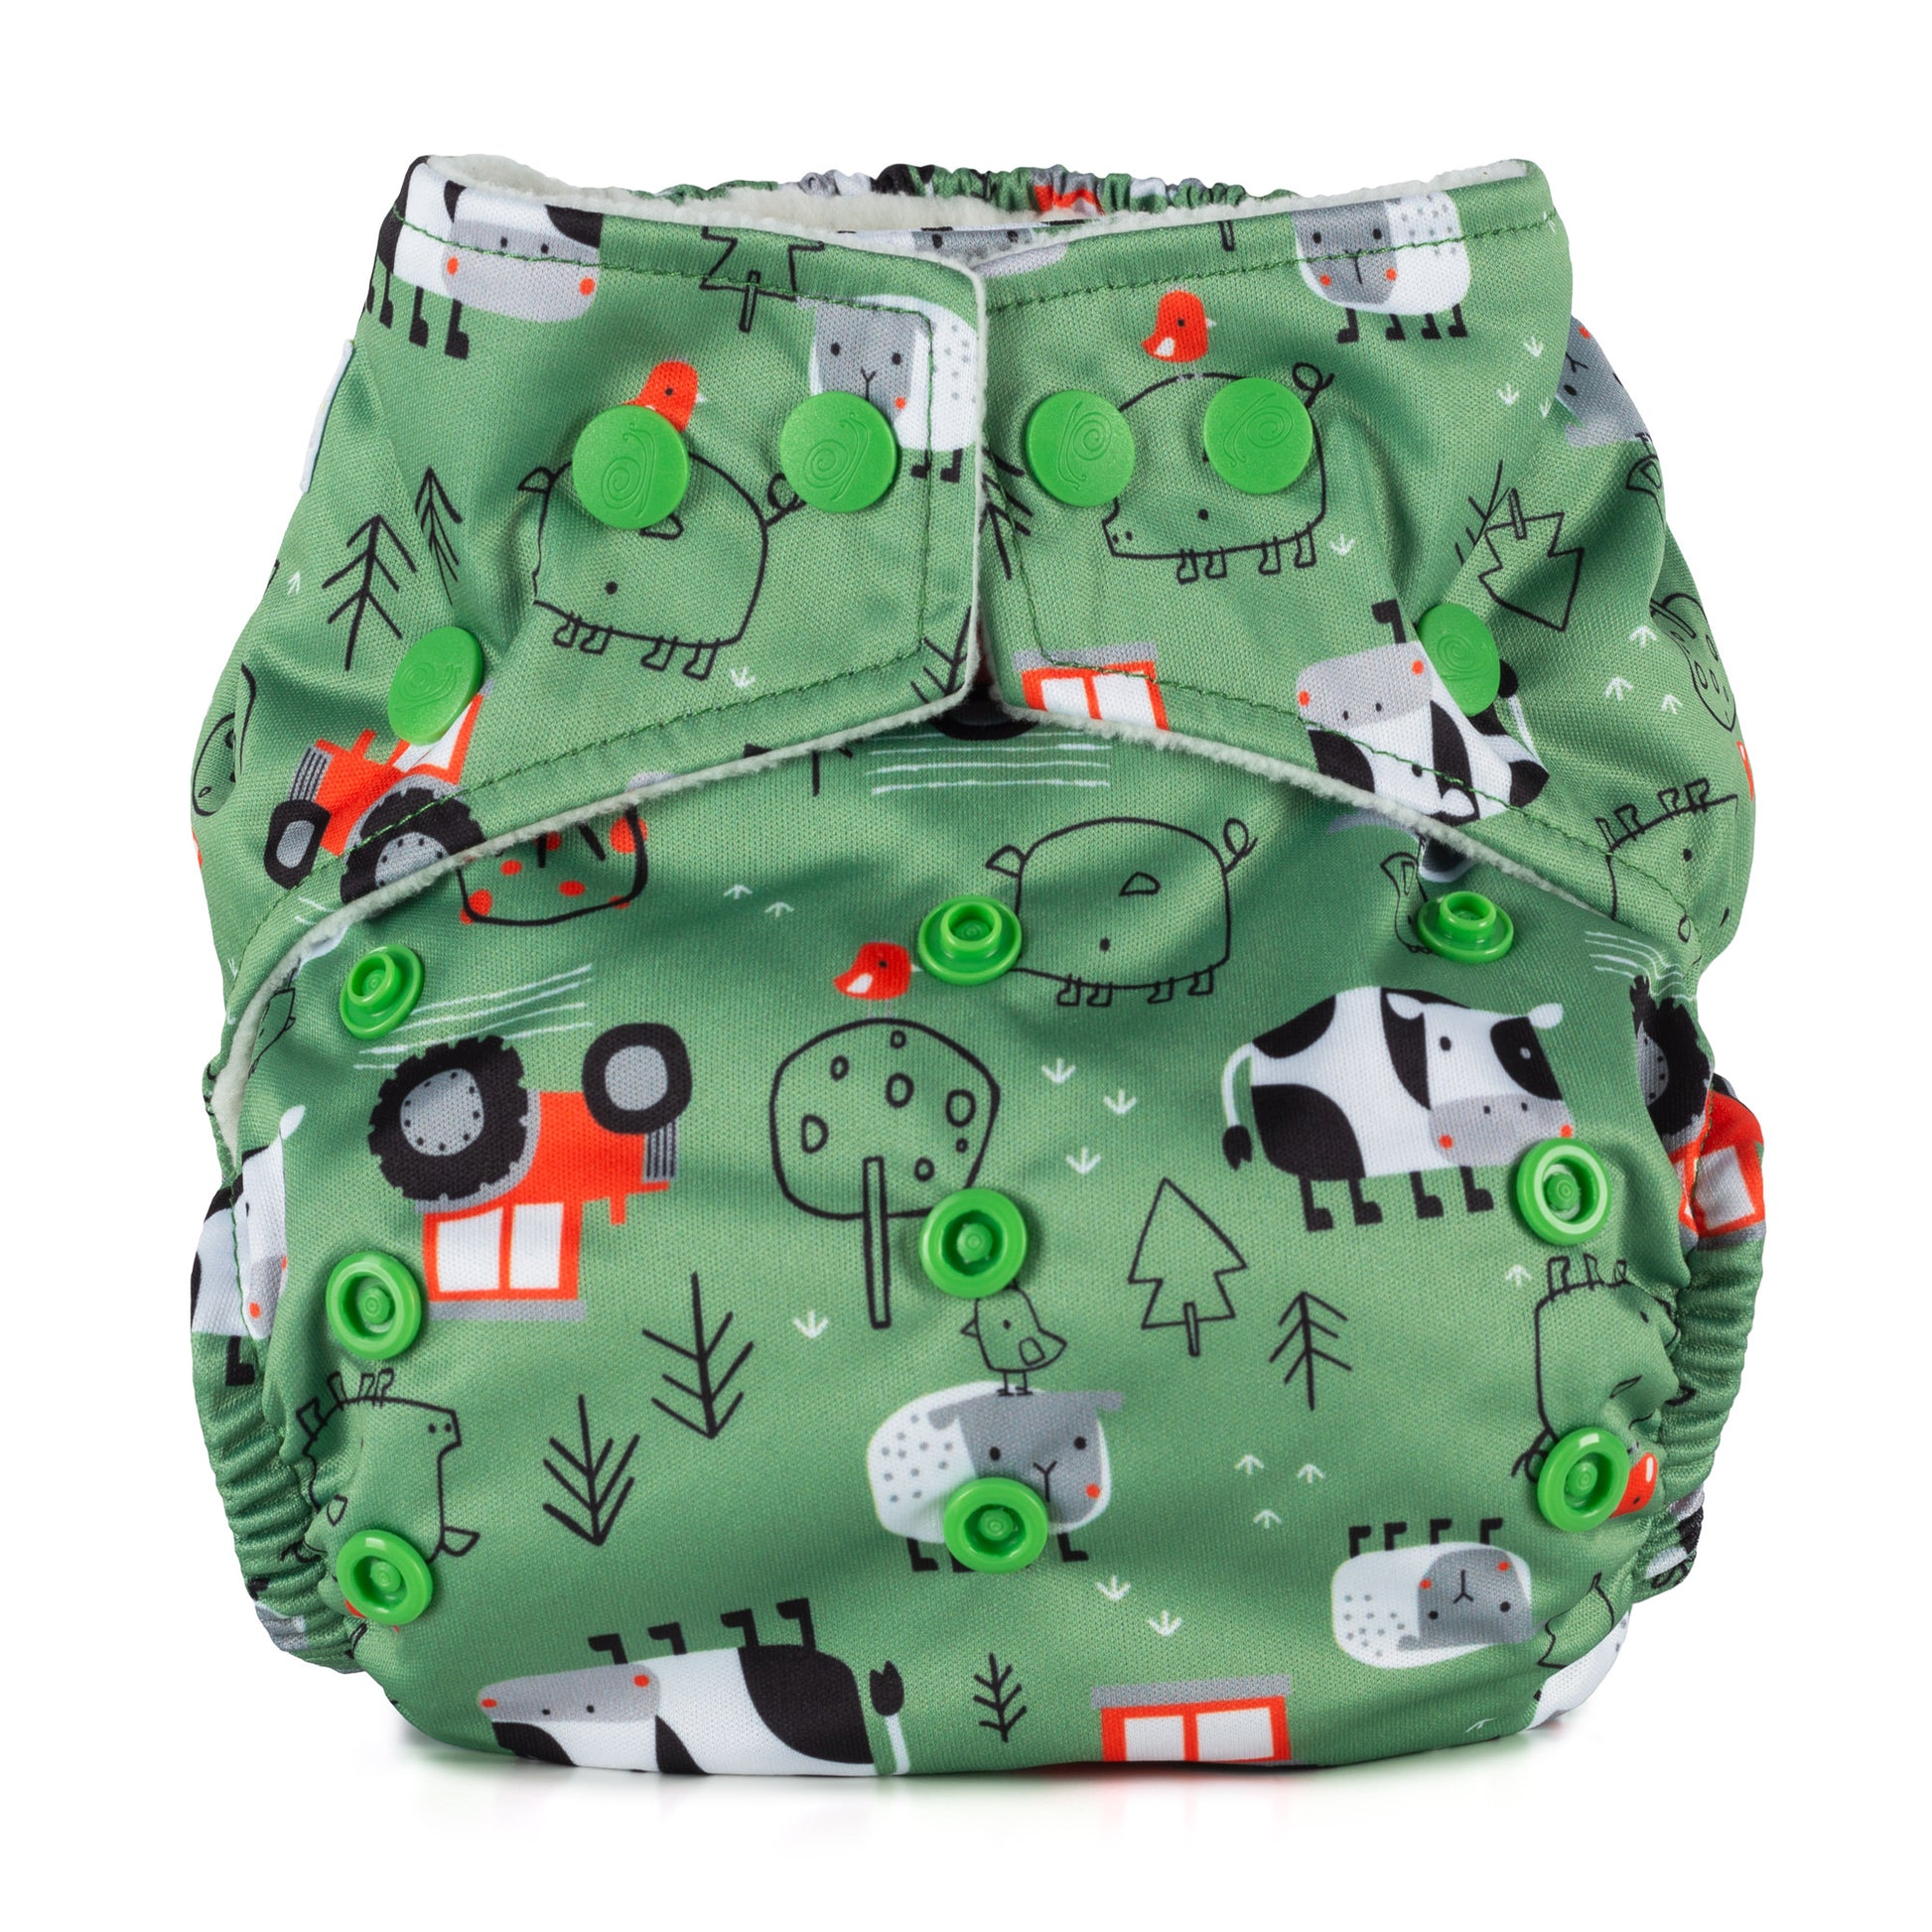 Green reusable cloth nappy with farmyard print, including tractor, cow, pig, sheep and poppers around the waist and rise snaps across the front.